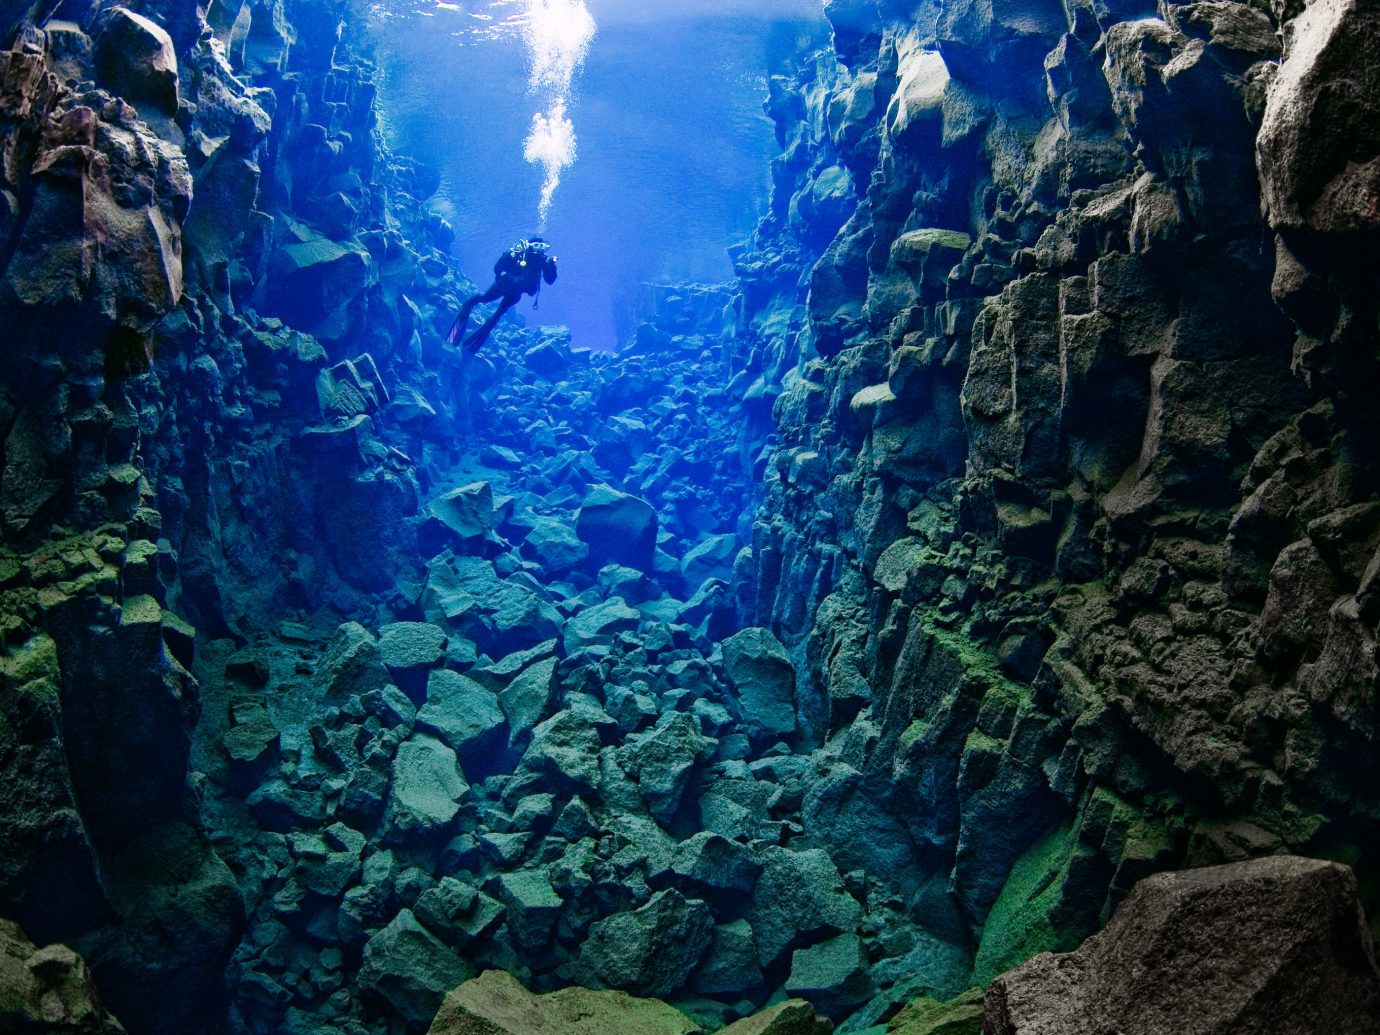 Iceland Travel Tips rock reef outdoor landform marine biology geographical feature Nature coral reef underwater biology mountain coral screenshot formation stone aquarium swimming surrounded ocean floor